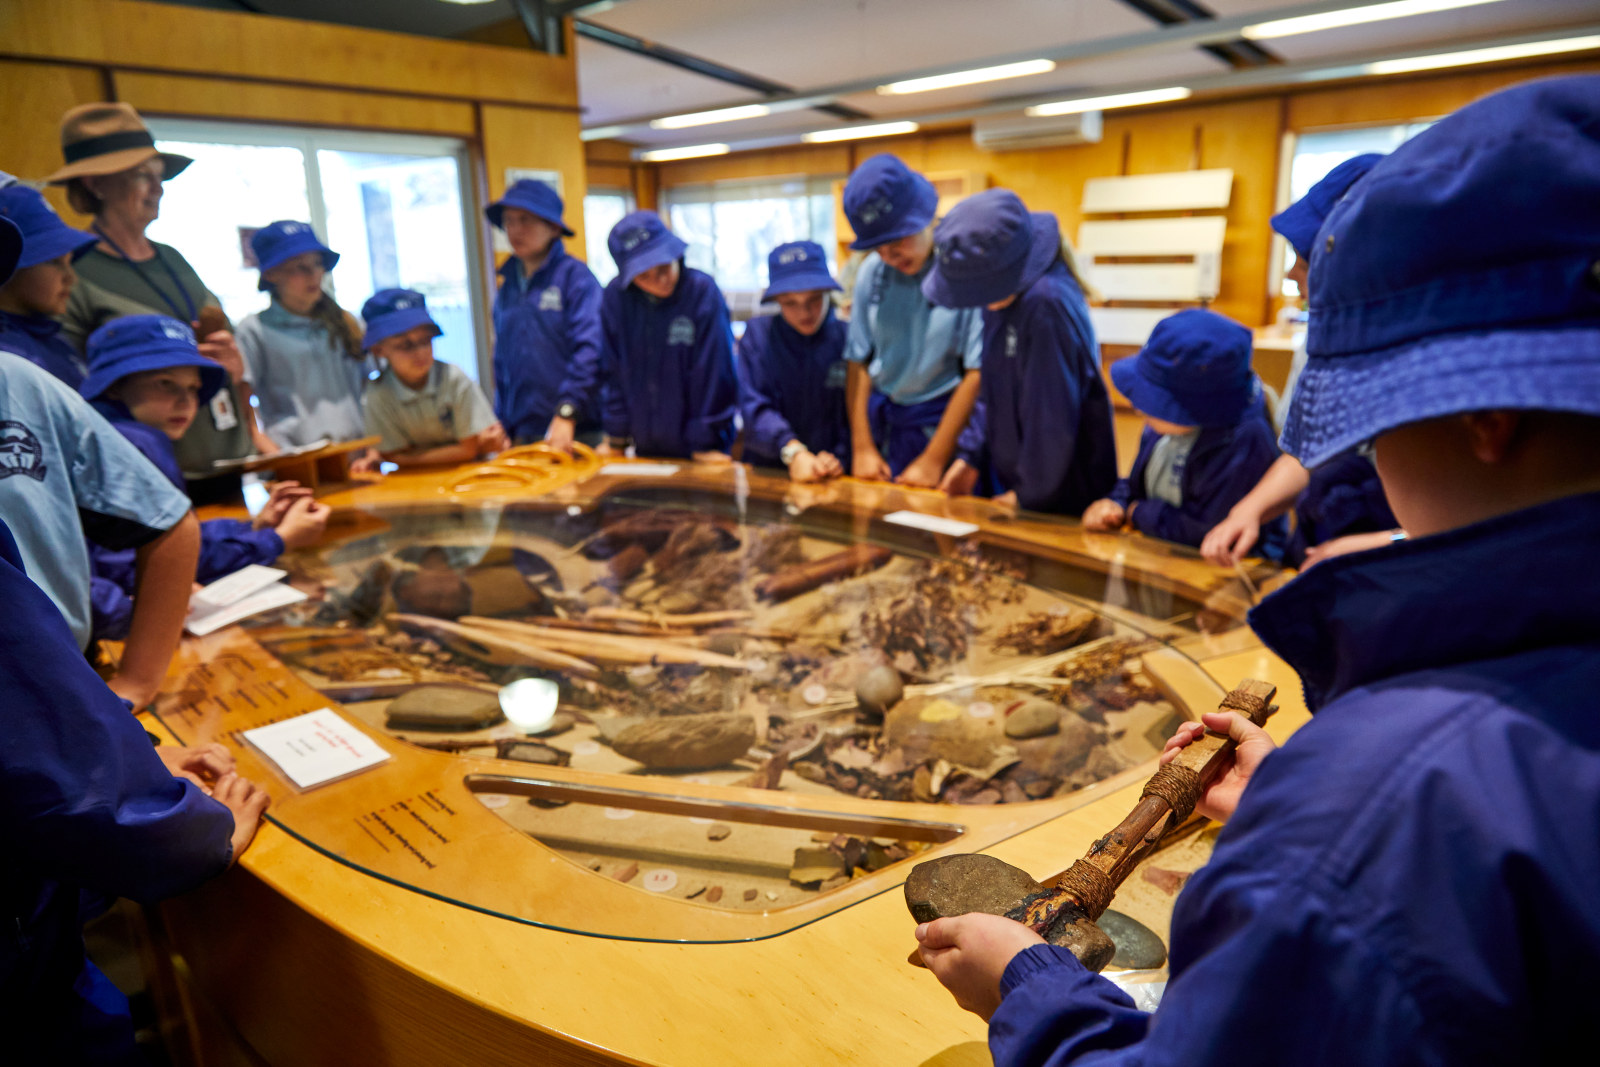 Students gather around the Darug object case in the Visitor Centre, examining artefacts and displays from the local indigenous community.